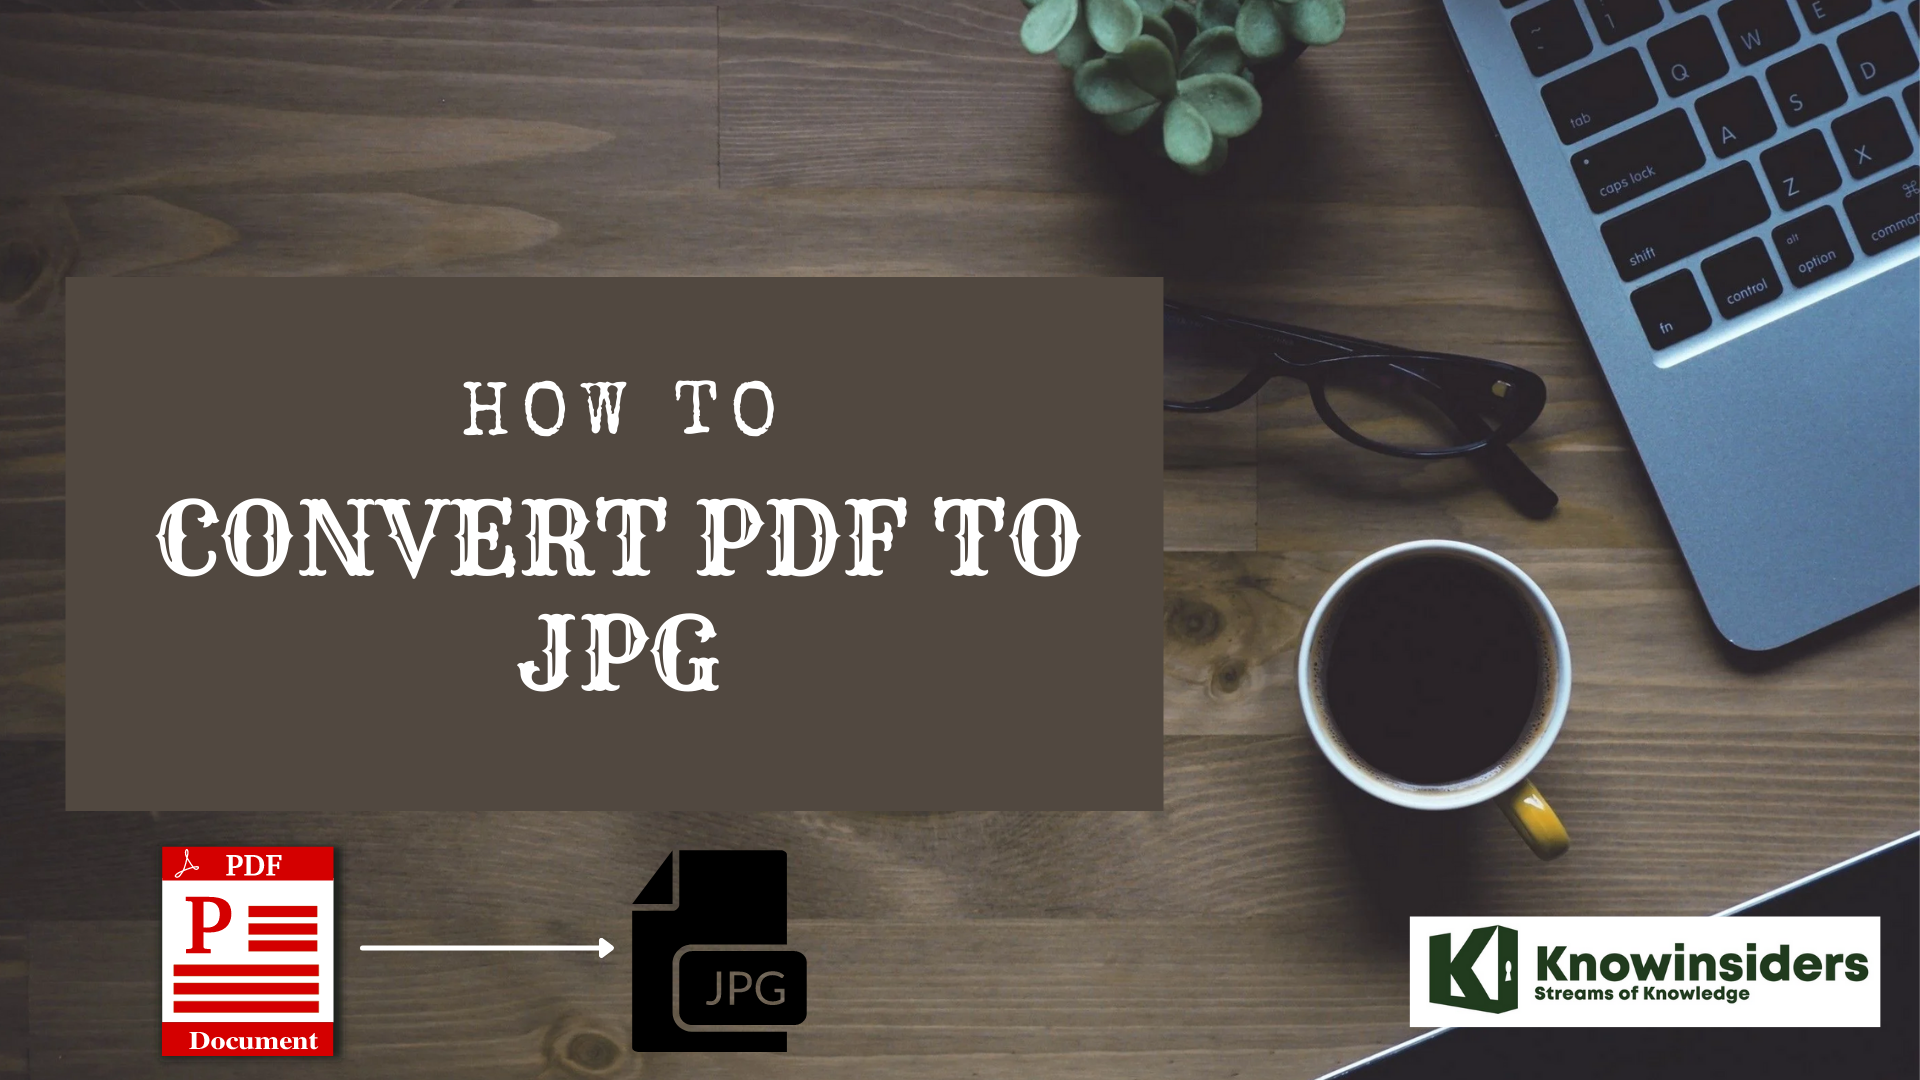 How to Convert PDF to JPG: Step-By-Step Guide